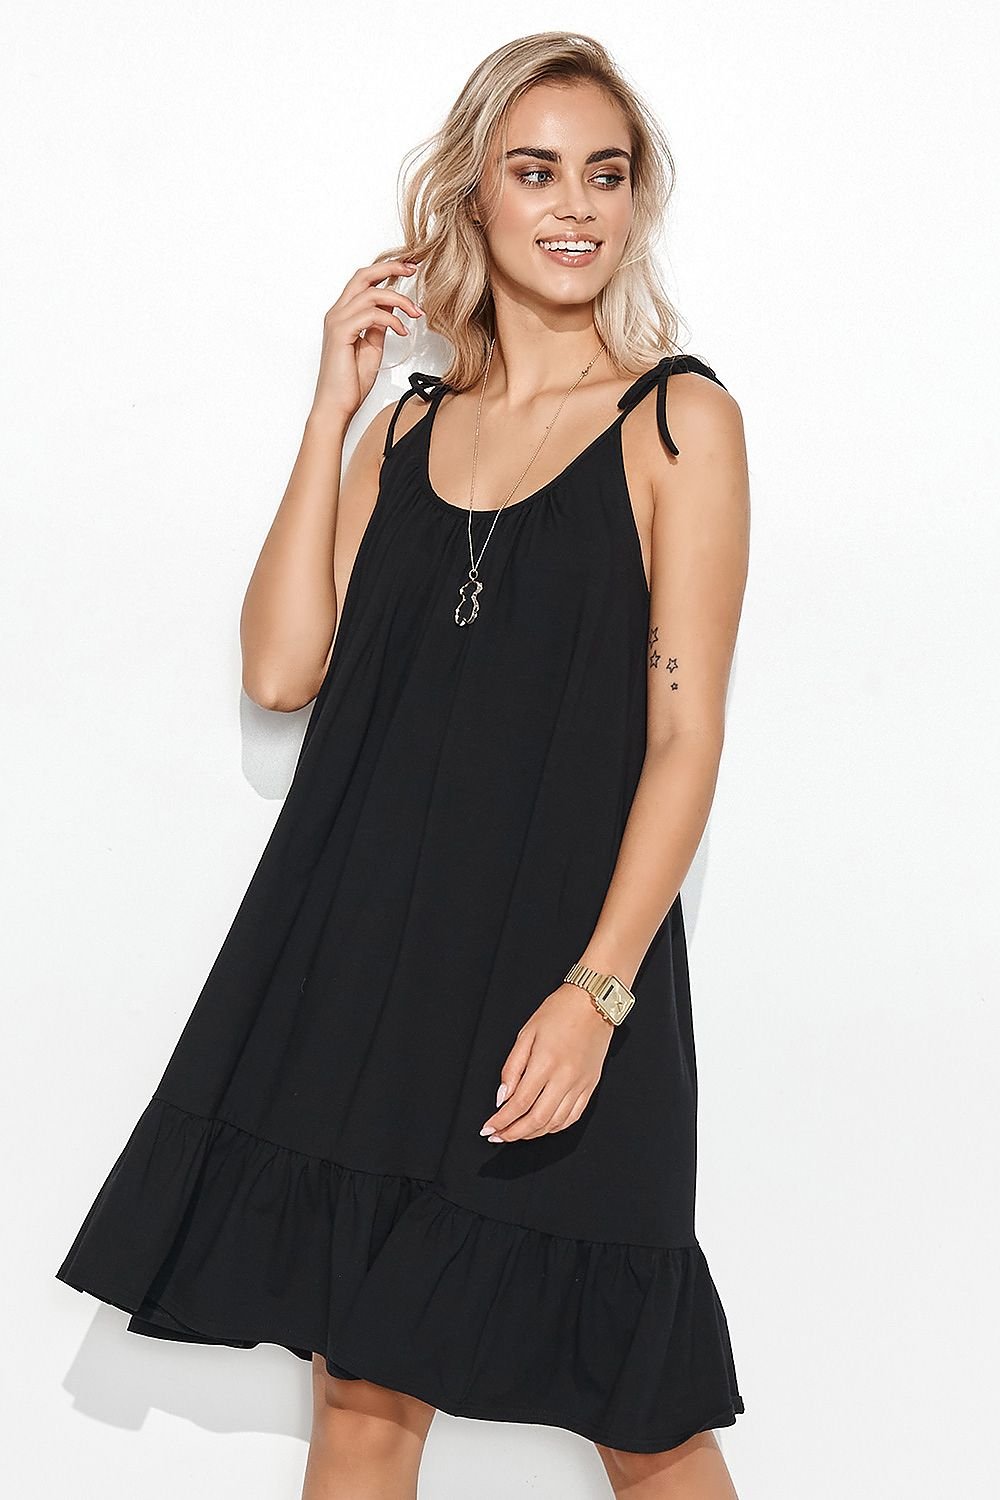 Whimsy Frill Casual Chic Dress - Black / one-size-fits-all - Sport Finesse